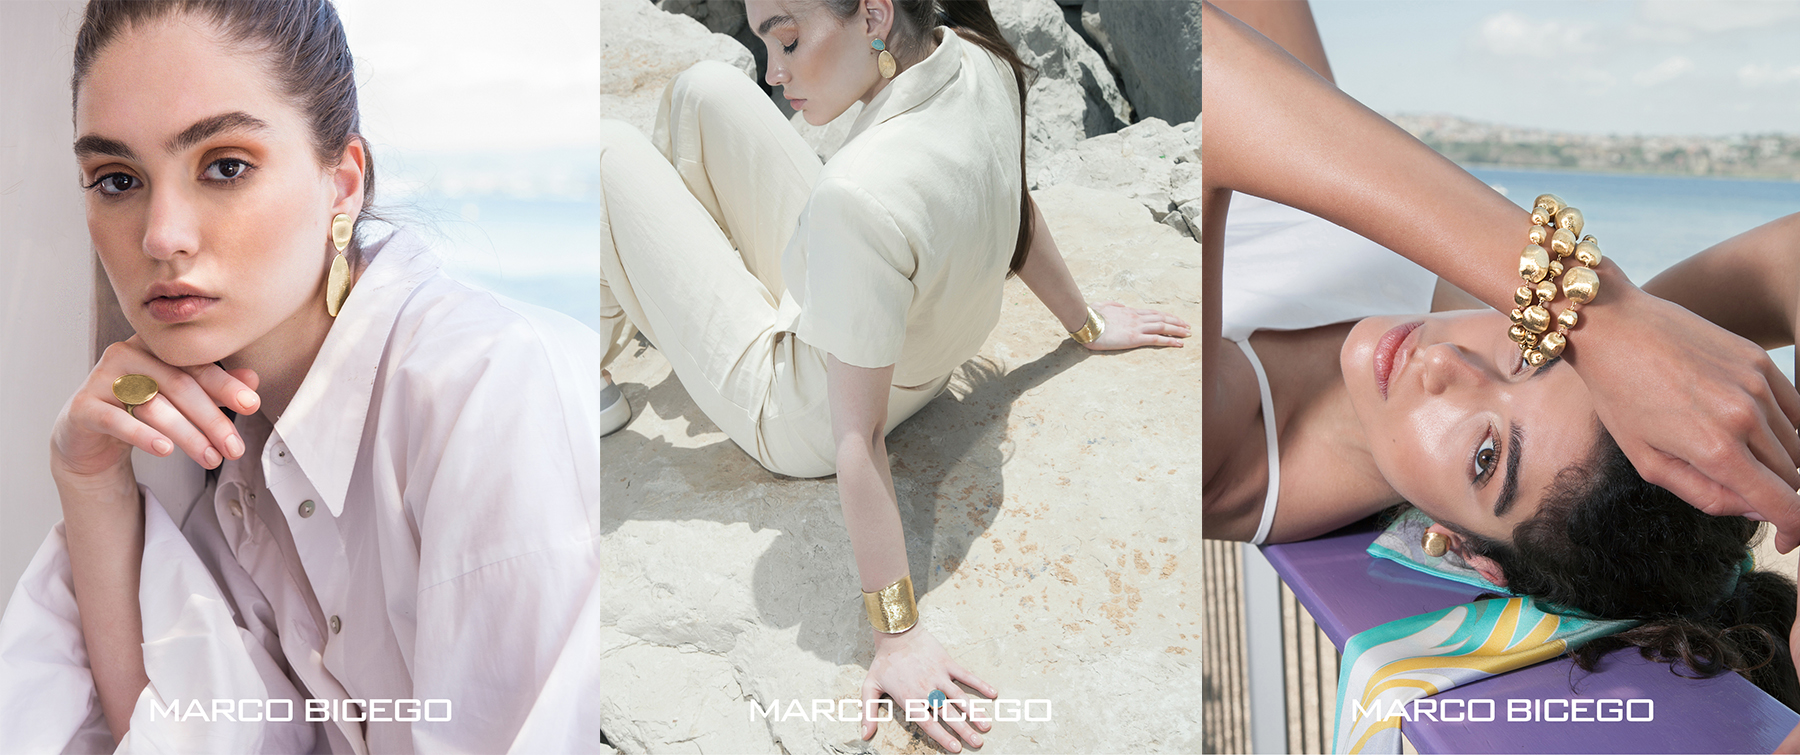 Three images of Marco Bicego jewellery being modelled